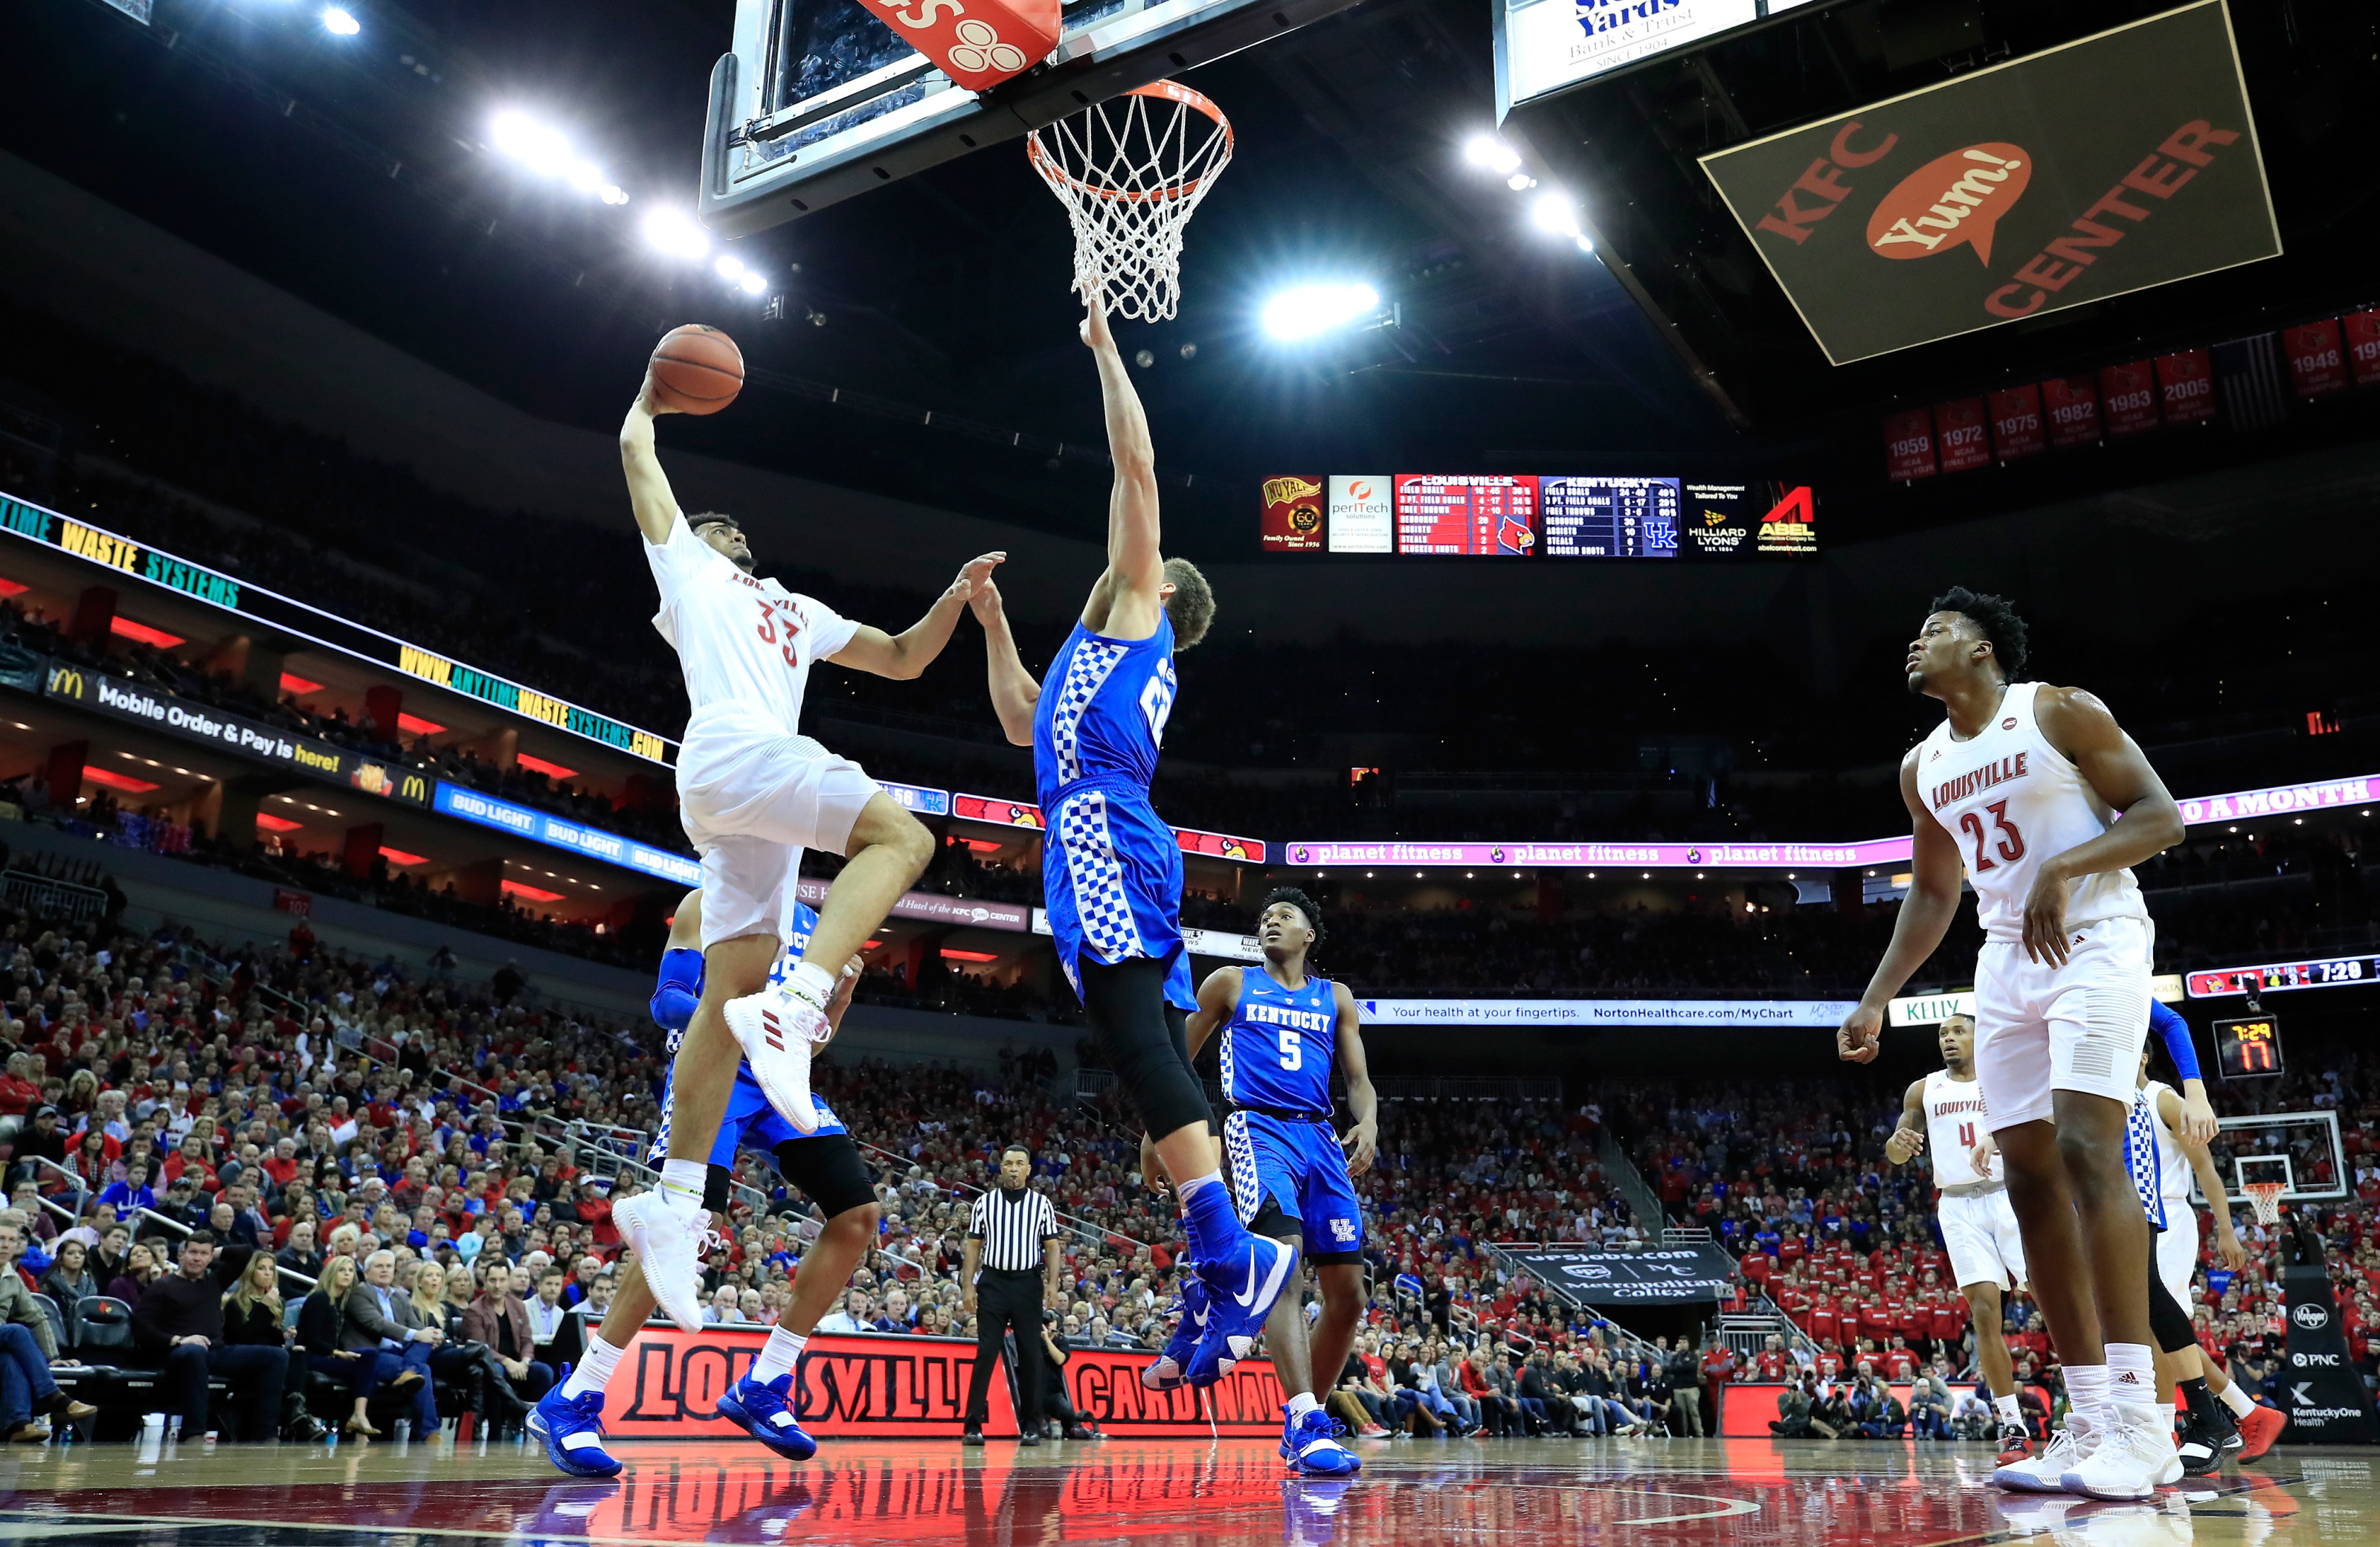 UK basketball vs Louisville: See photos from the in-state rivalry game